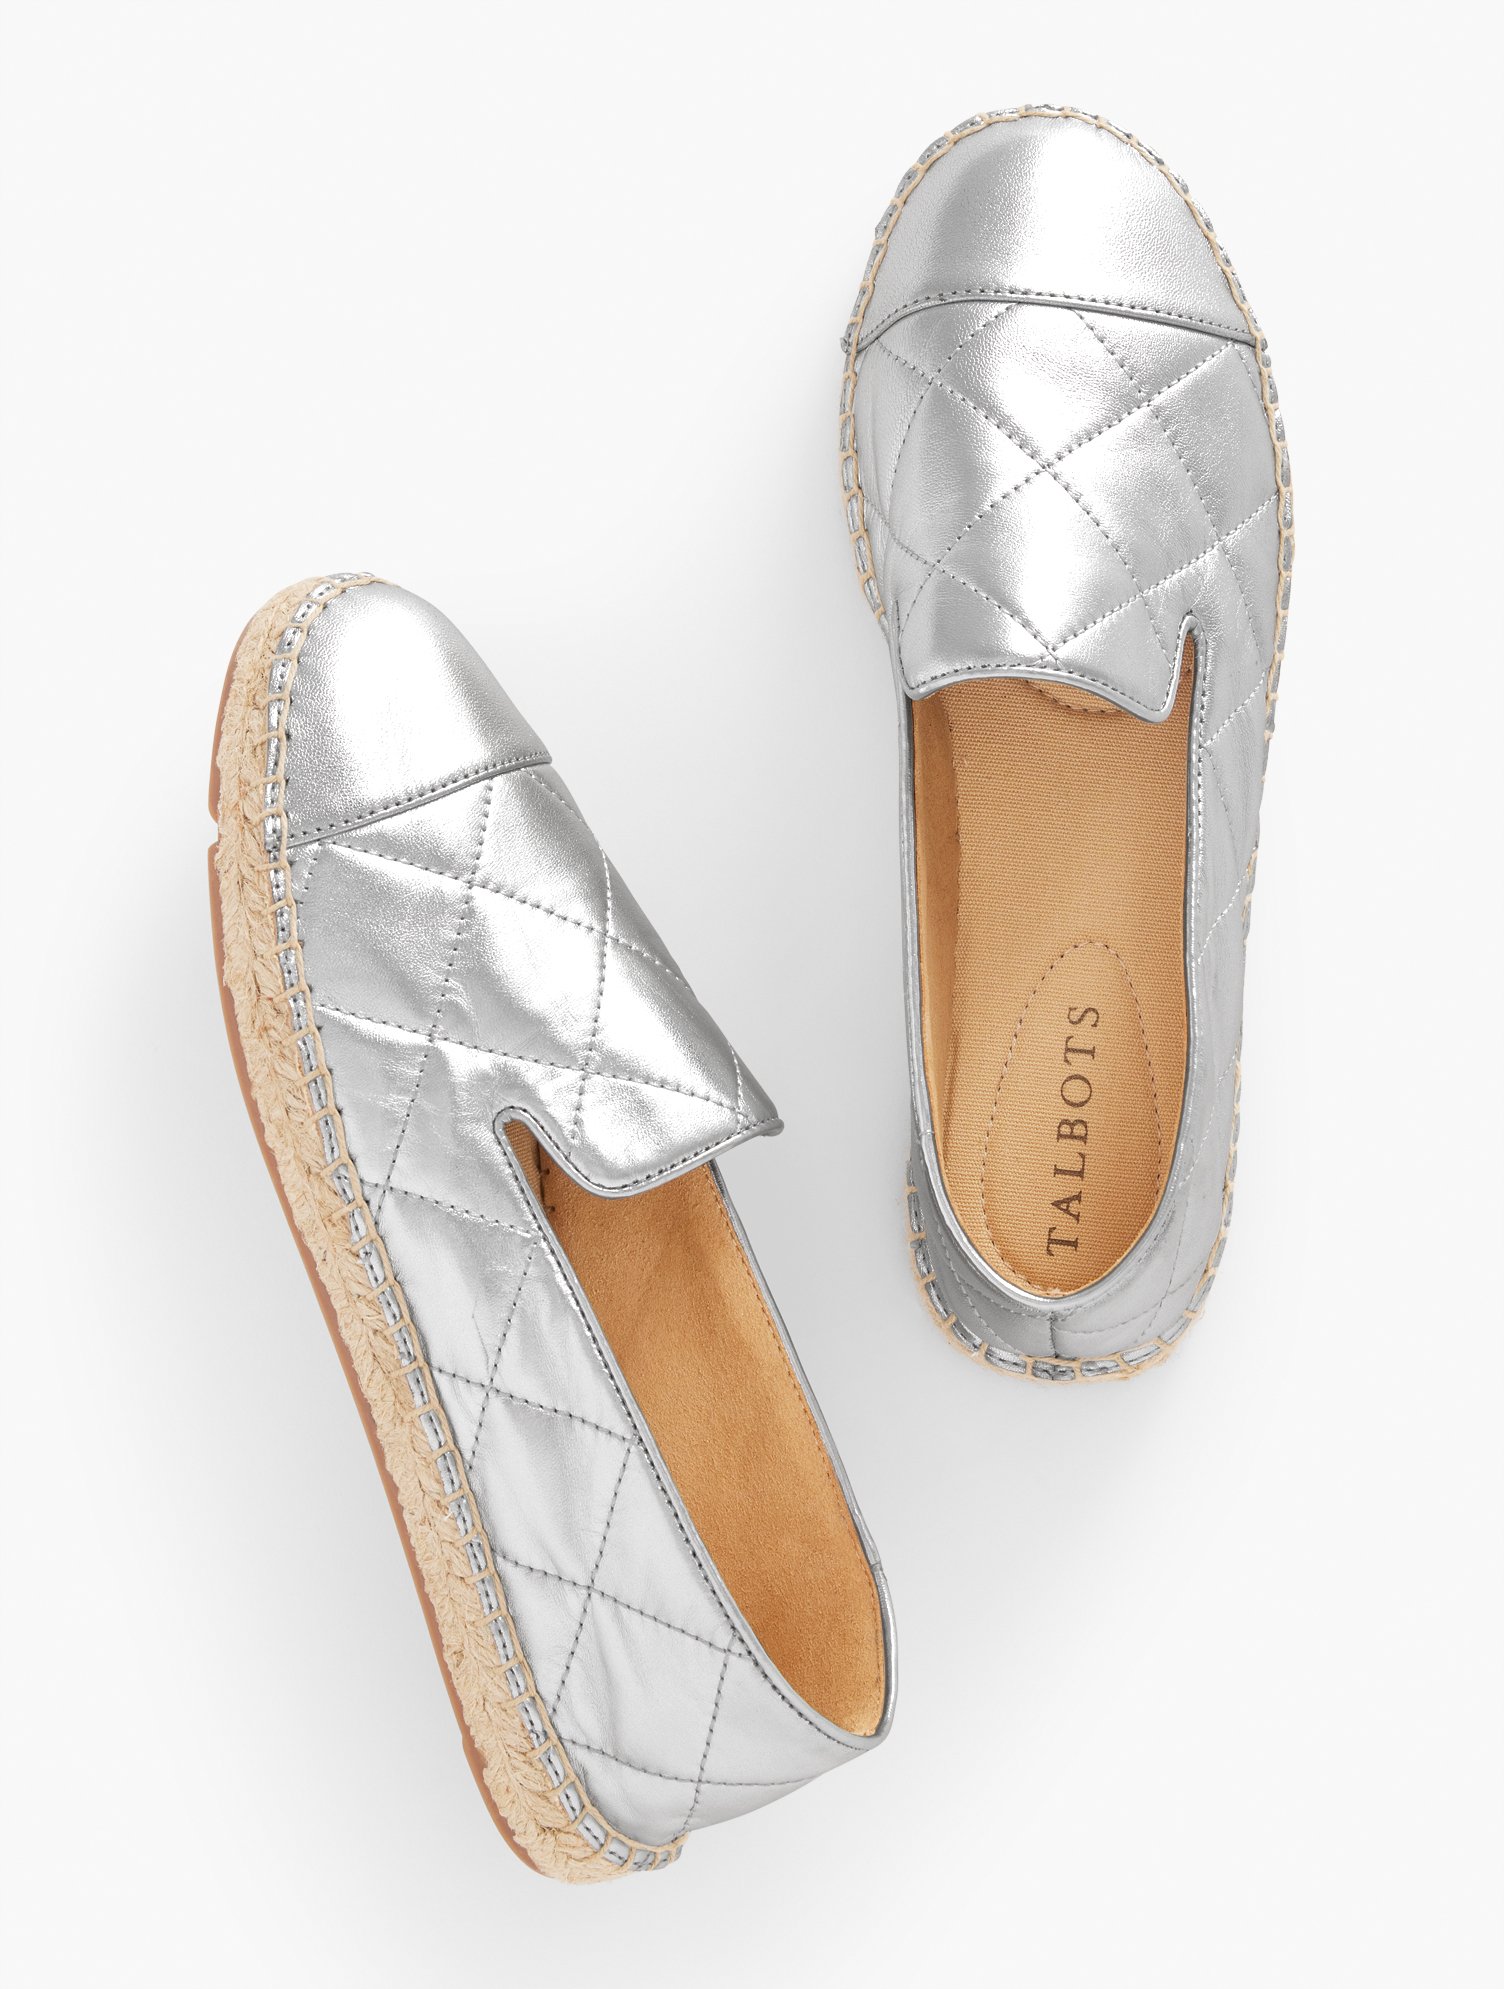 Talbots Izzy Quilted Espadrille Flats - Metallic Leather - Silver - 8m